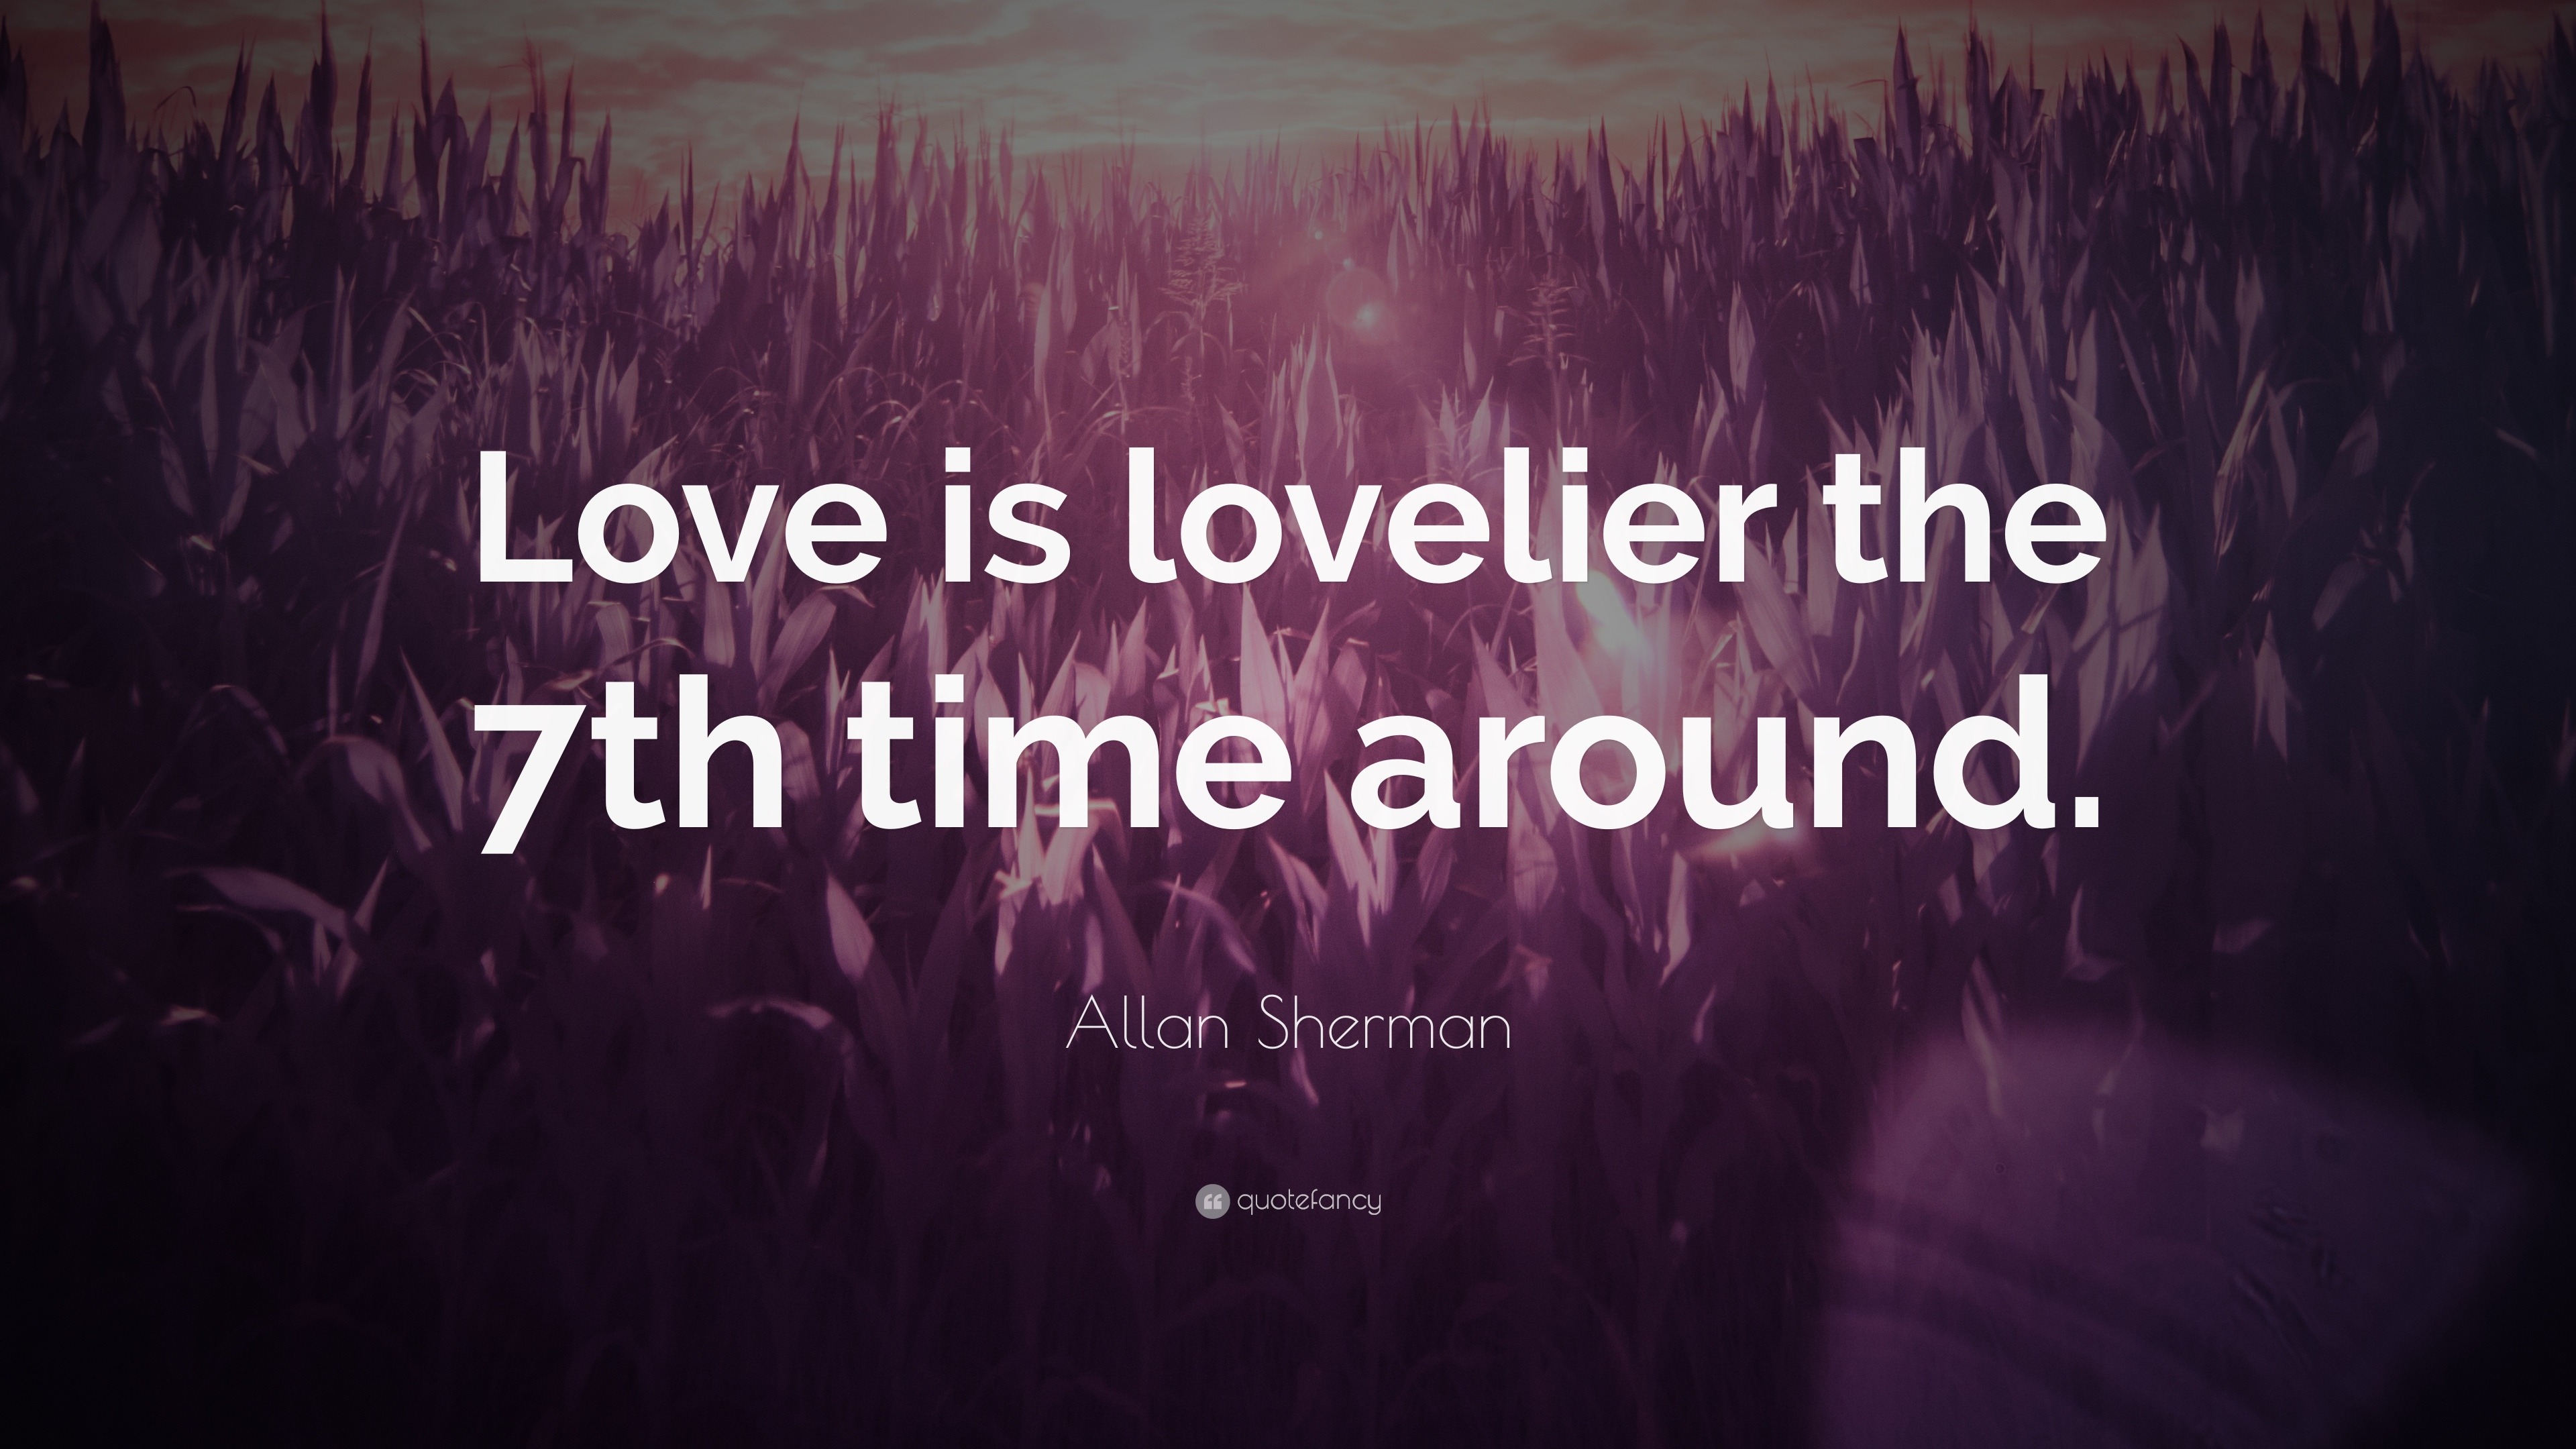 Allan Sherman Quote “love Is Lovelier The 7th Time Around”